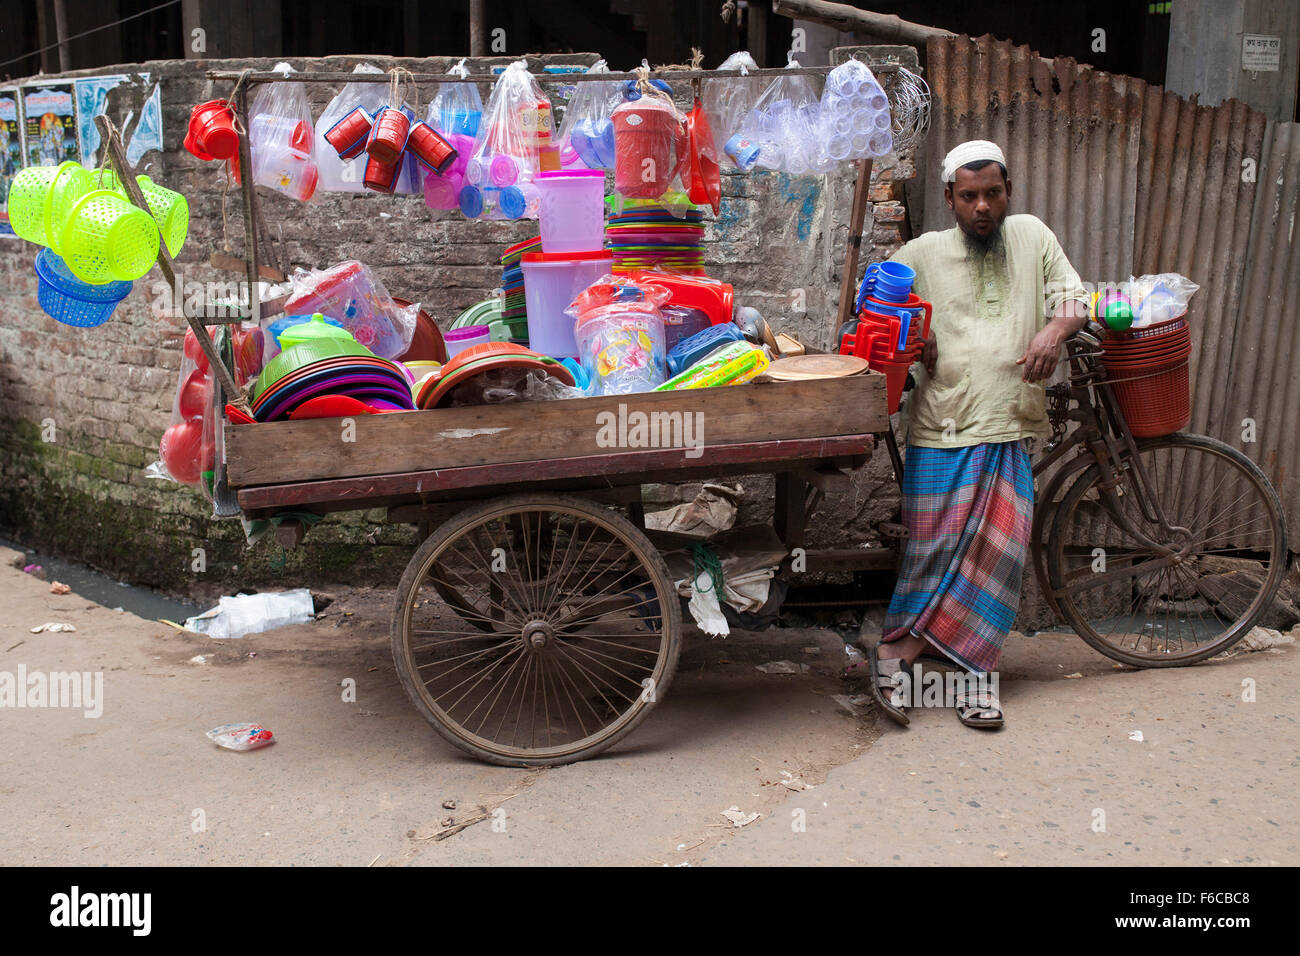 Dhaka, Bangladesh. 15th November, 2015. A street hawker standing with his stall beside street in Old  Dhaka on November 15, 2015. Old Dhaka is a term used to refer to the historic old city of Dhaka, the capital of modern Bangladesh. It was founded in 1608 as Jahangir Nagar, the capital of Mughal Bengal. Credit:  zakir hossain chowdhury zakir/Alamy Live News Stock Photo